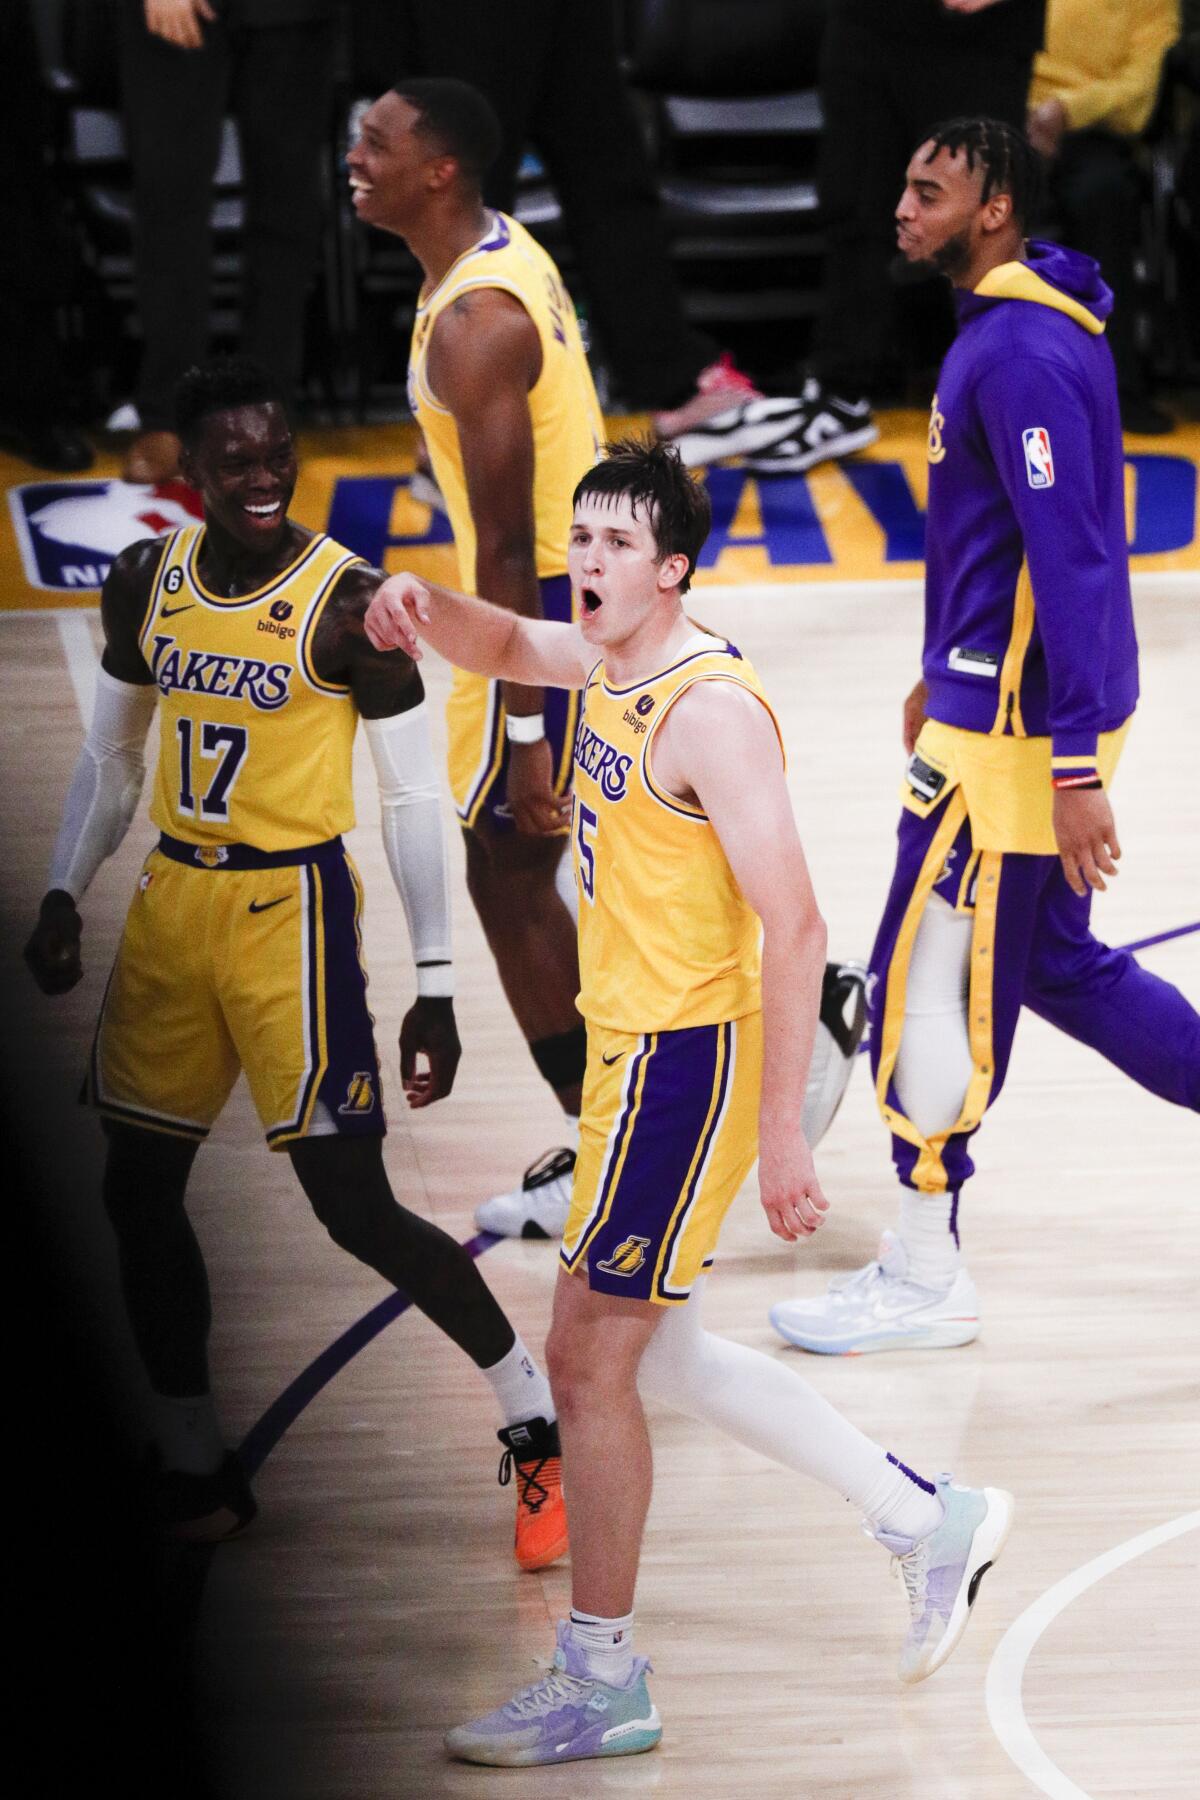 Lakers guard Austin Reaves reacts after making a buzzer-beating half-court shot.